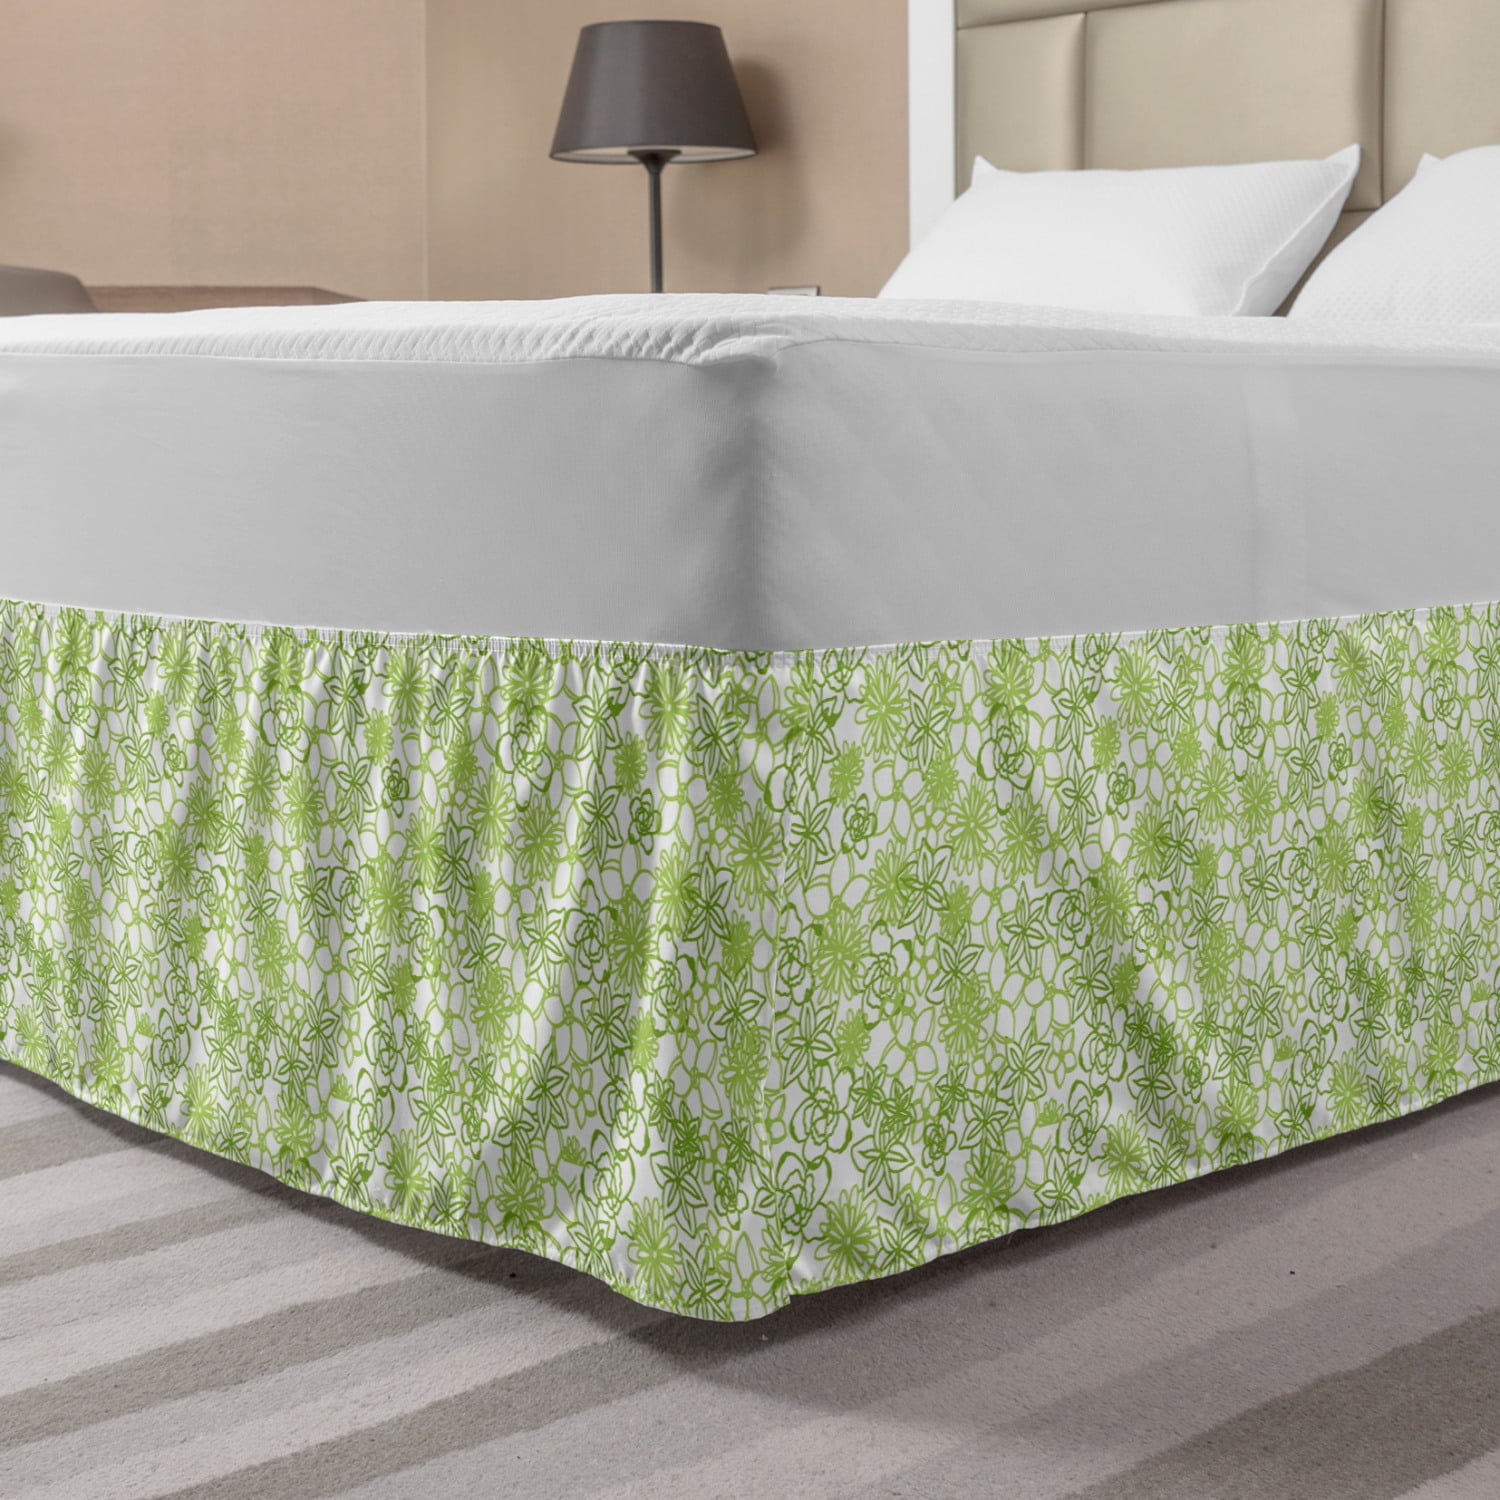 Floral Bed Skirt, Pastel Flower Motifs with Leaves and Branches Aster ...